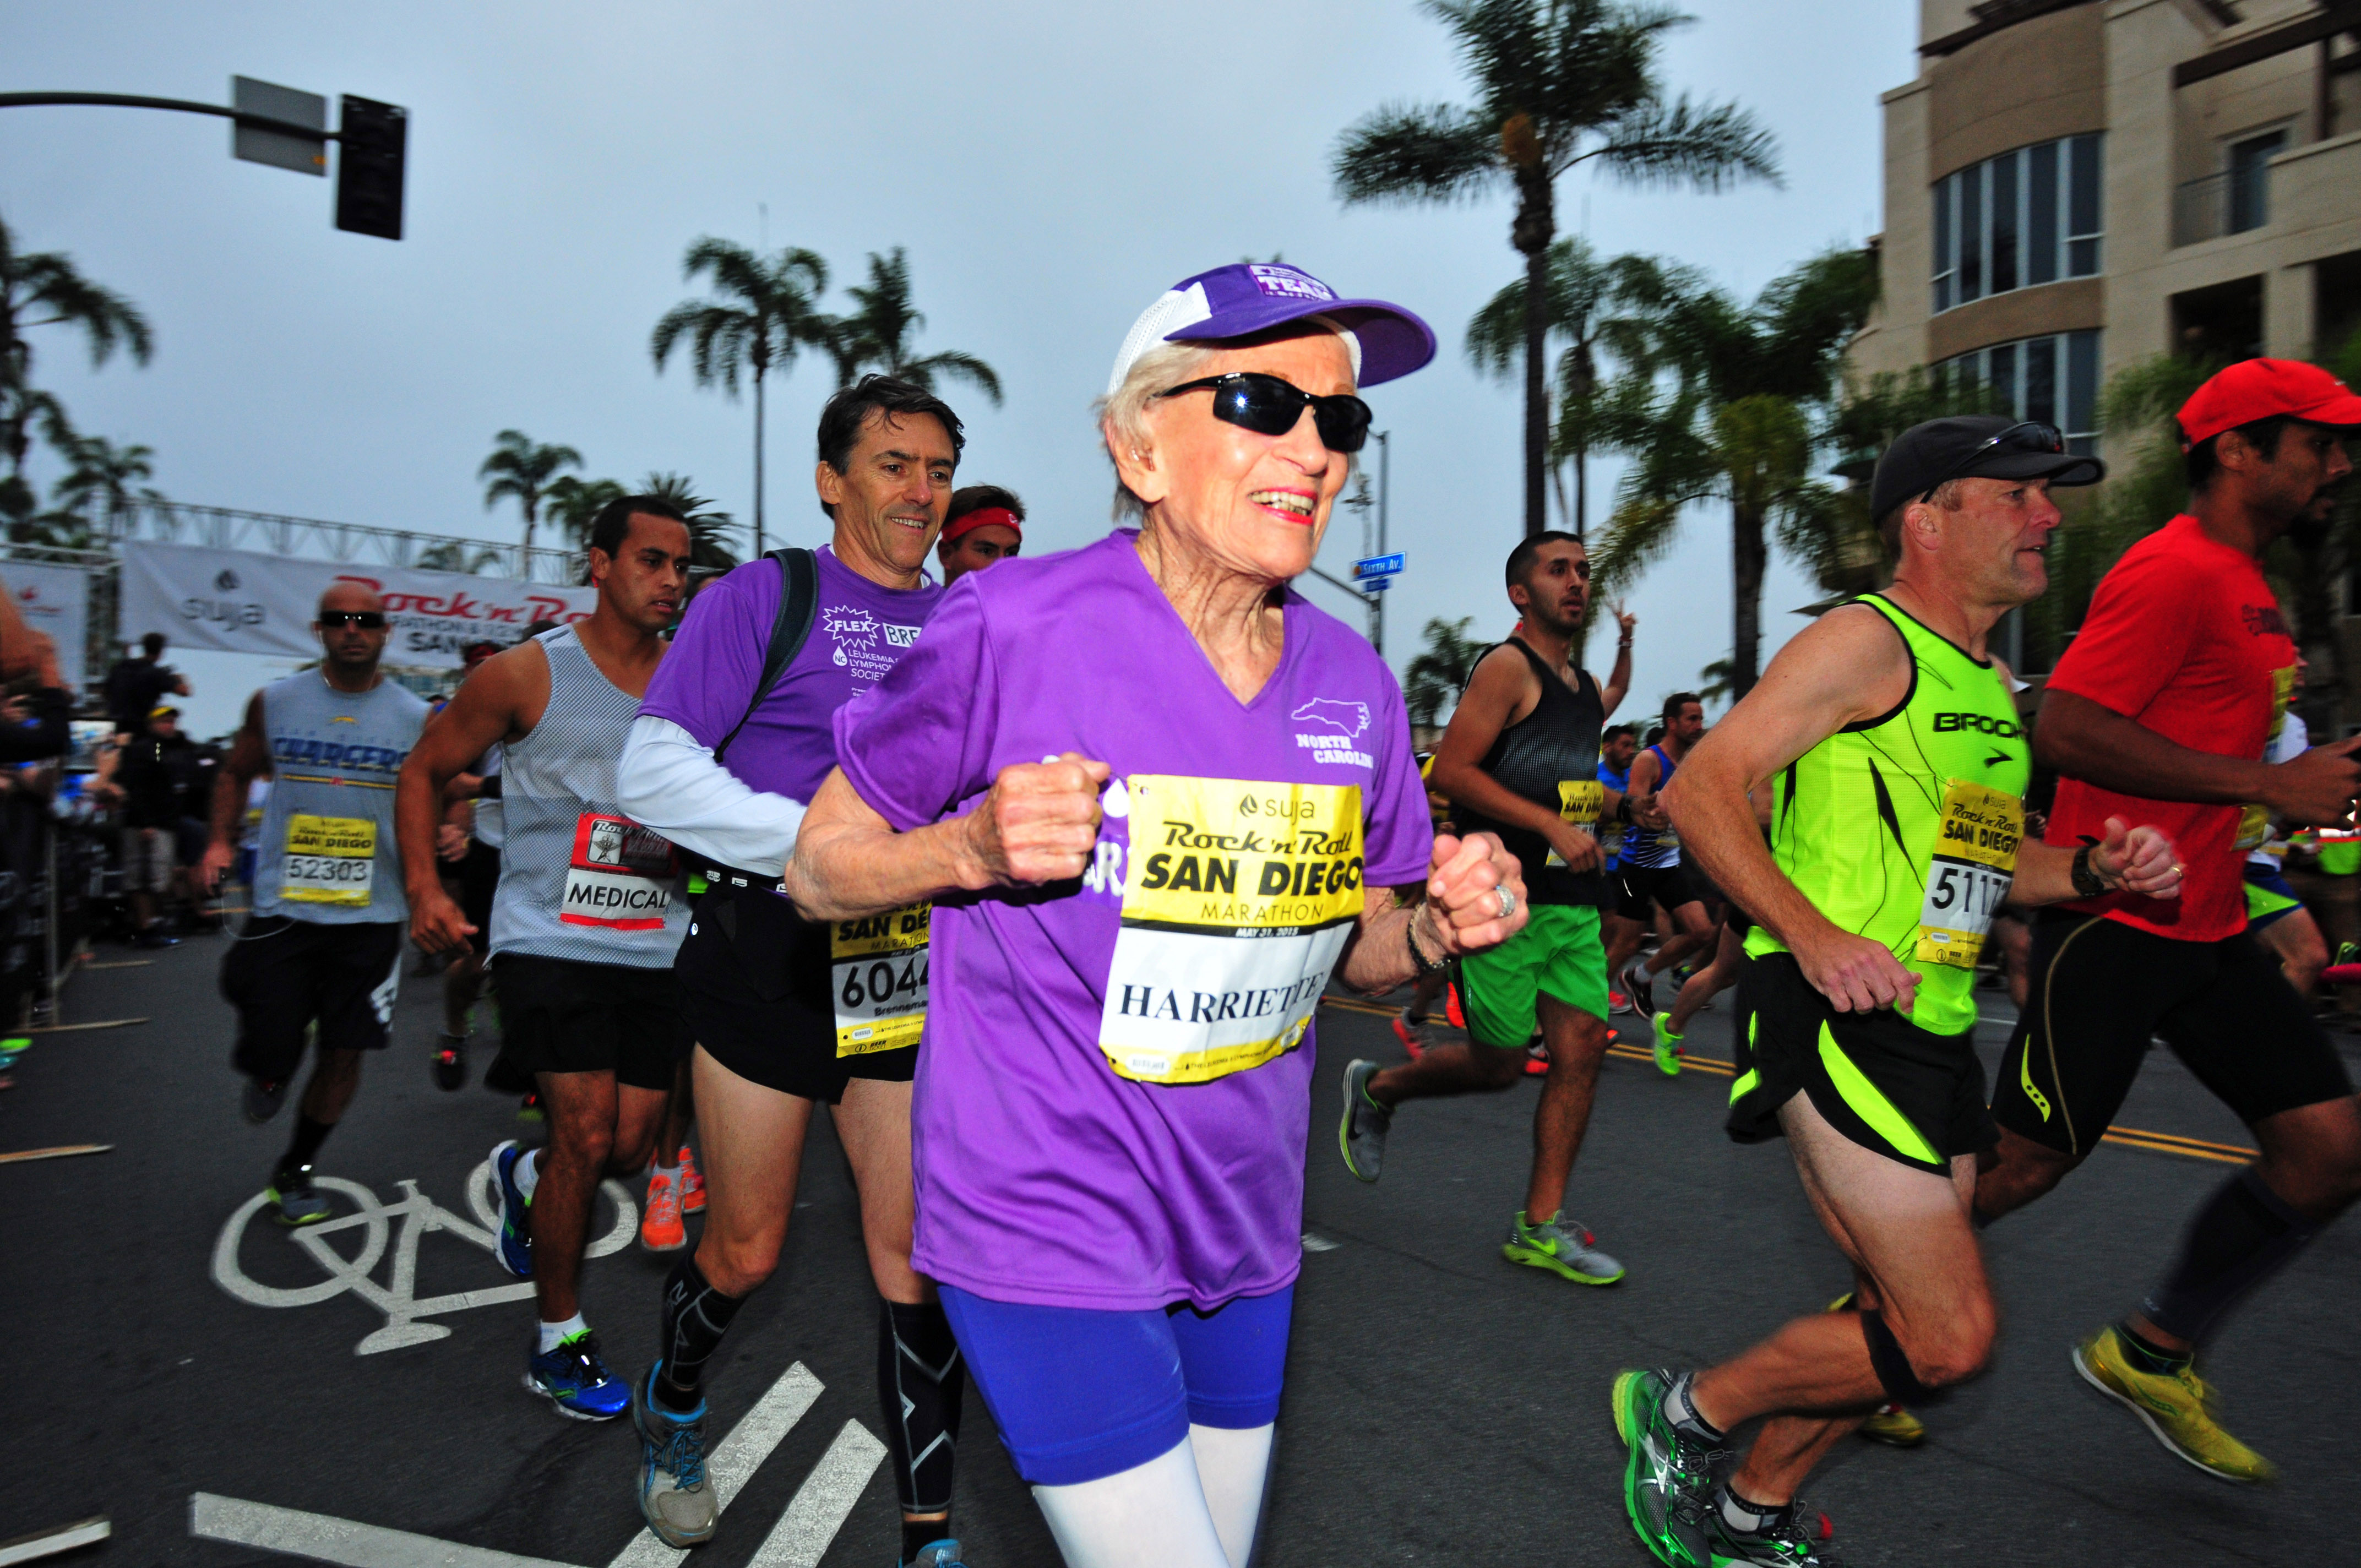 92yearold oldest woman to finish a marathon For The Win